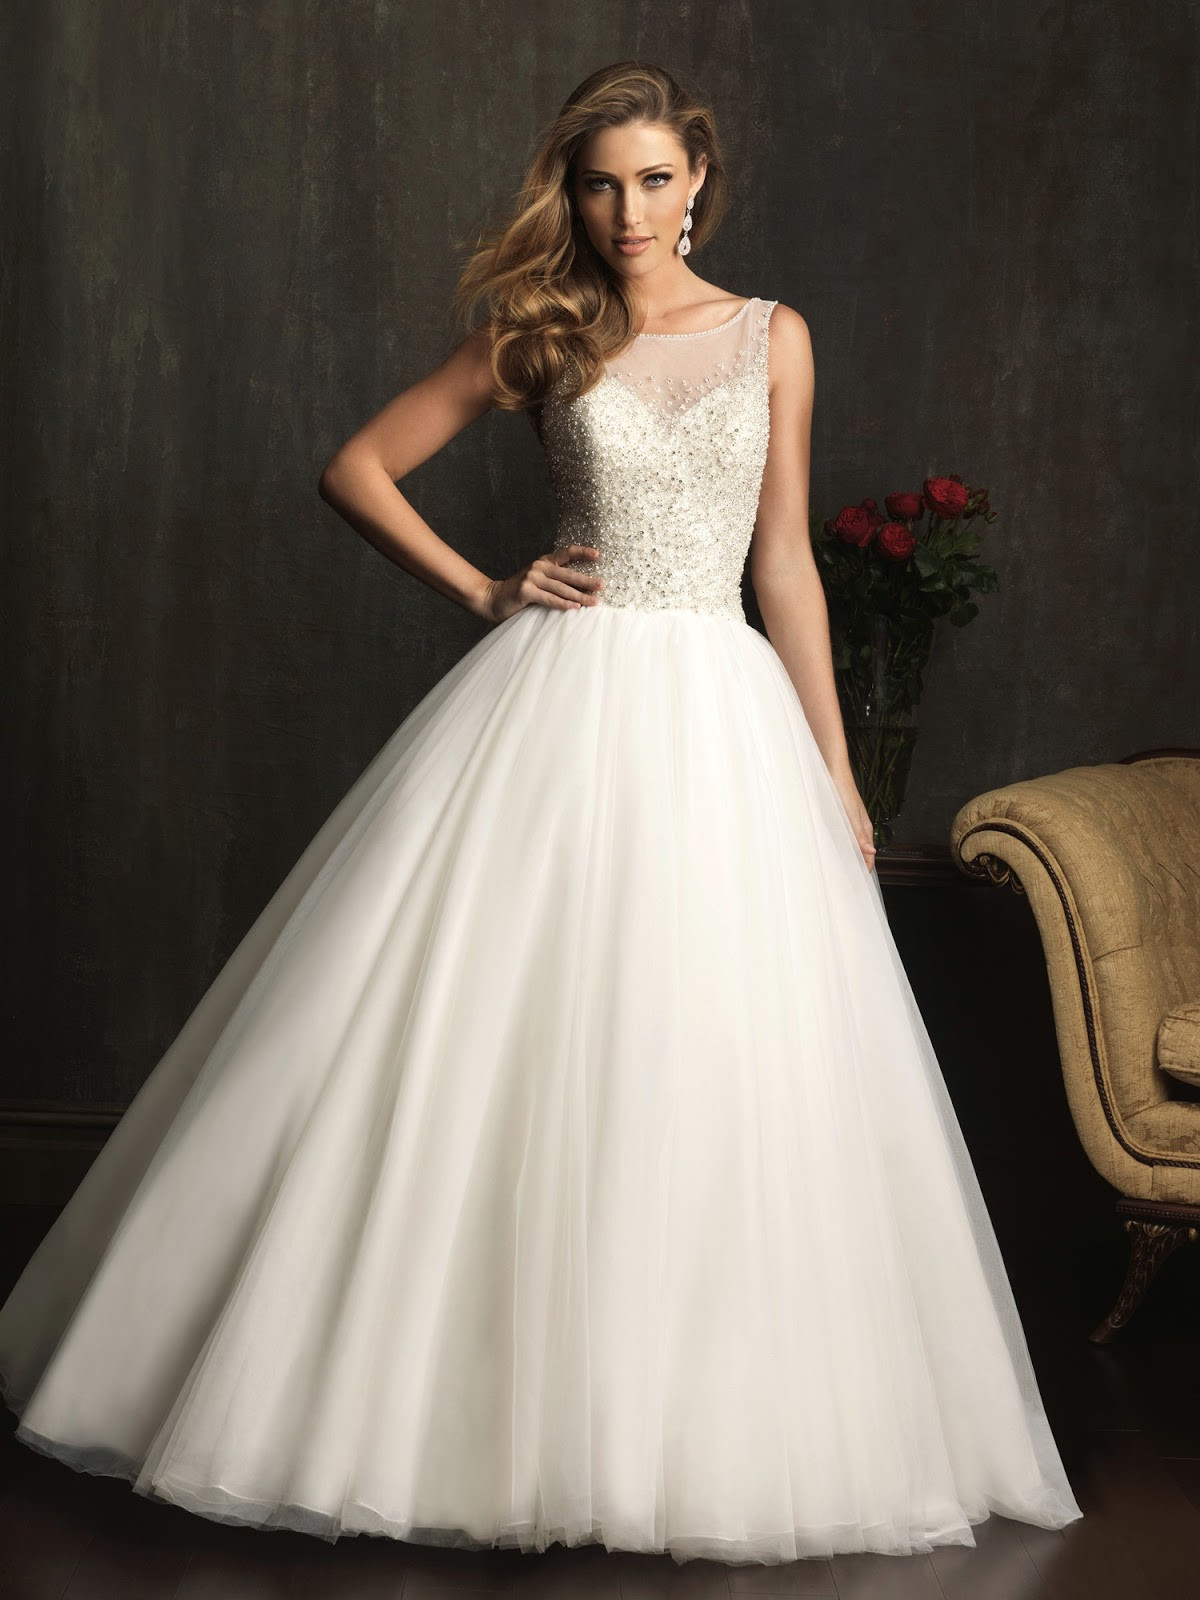 Ball Gown Wedding Dresses
 DressyBridal Allure Wedding Dresses Fall 2013 Collection